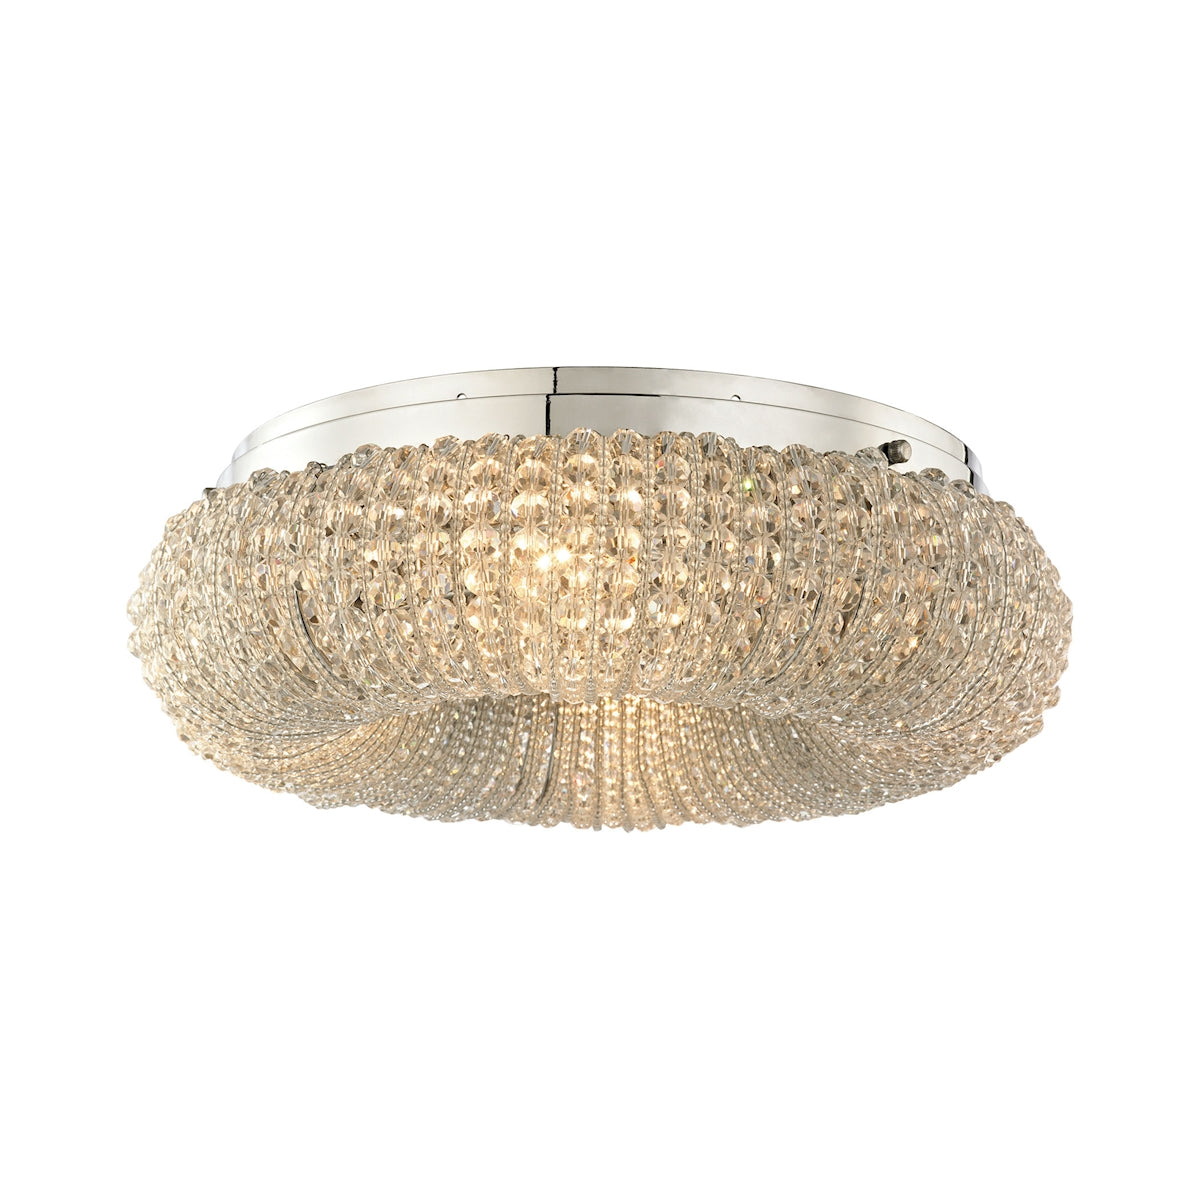 ELK Lighting 45290/4 Crystal Ring 4-Light Semi Flush in Chrome with Clear Crystal Beads